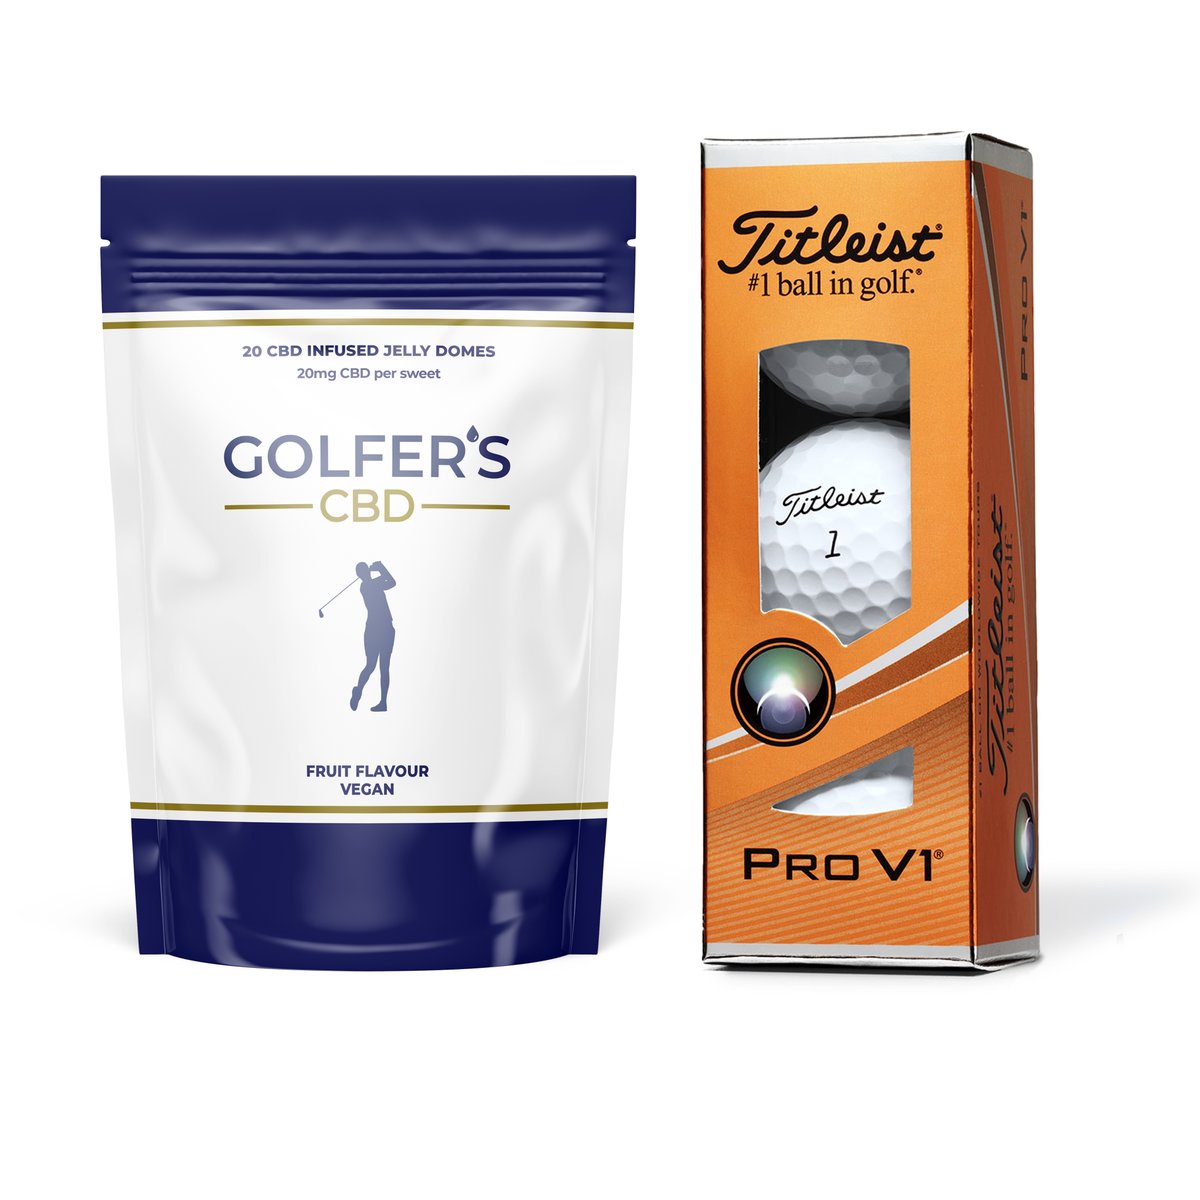 🎅 Thursday Giveaway 🎅 #GolfersCBD Domes pack contains 400mg fruit-flavoured jelly domes & a sleeve of Prov1s ⛳️ 🔥 Available until Friday 16th at £29.99 🔥 To win a pack for your stocking just RT and get more from your game in 2023 ⛳️ golferscbd.co.uk/gift-boxes/jel…